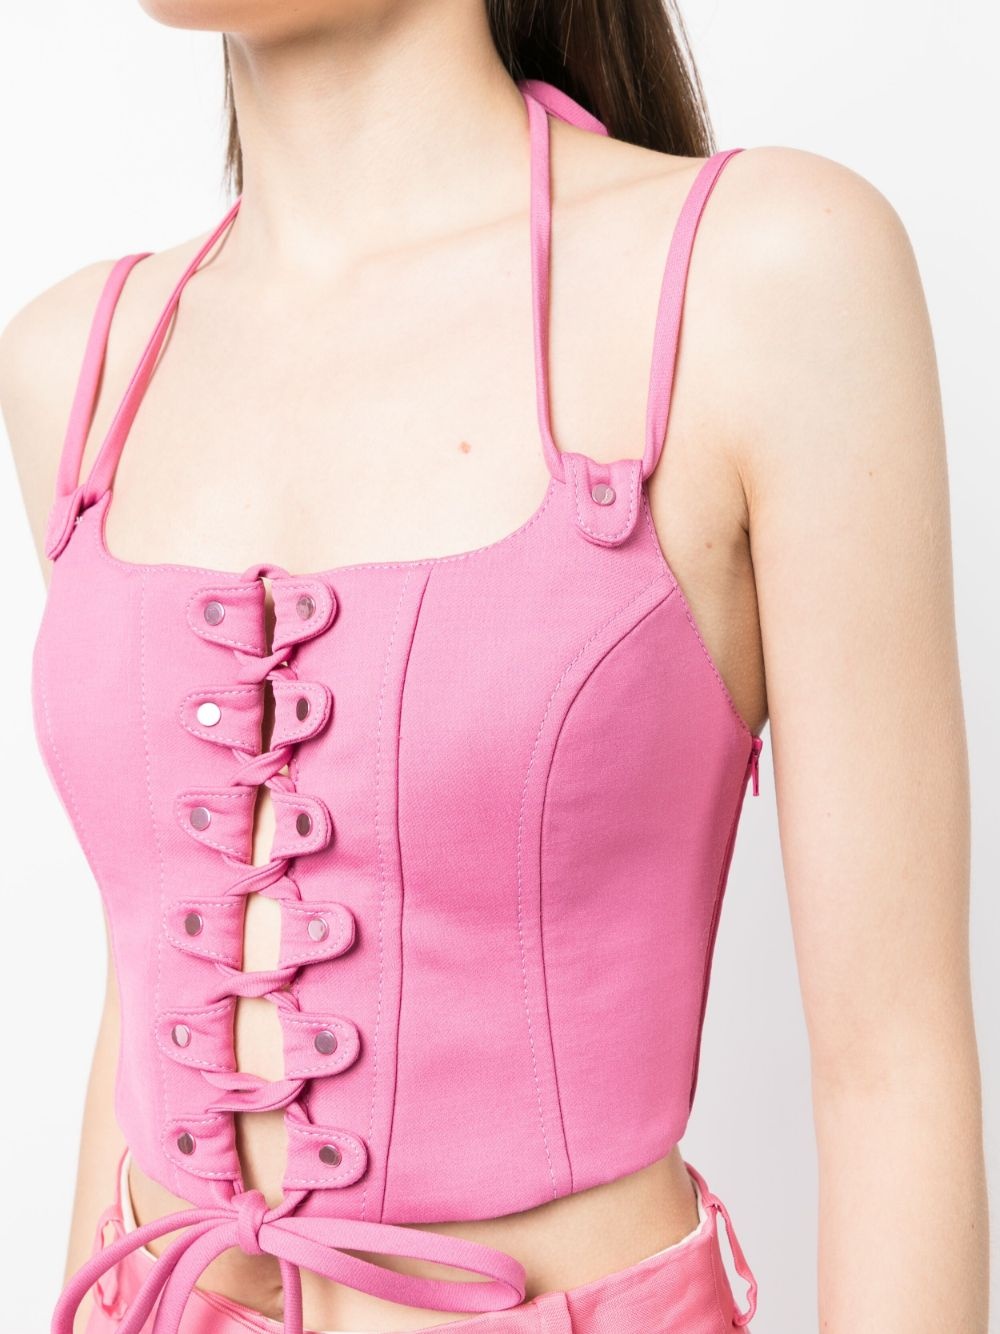 studded lace-up bustier top - 5